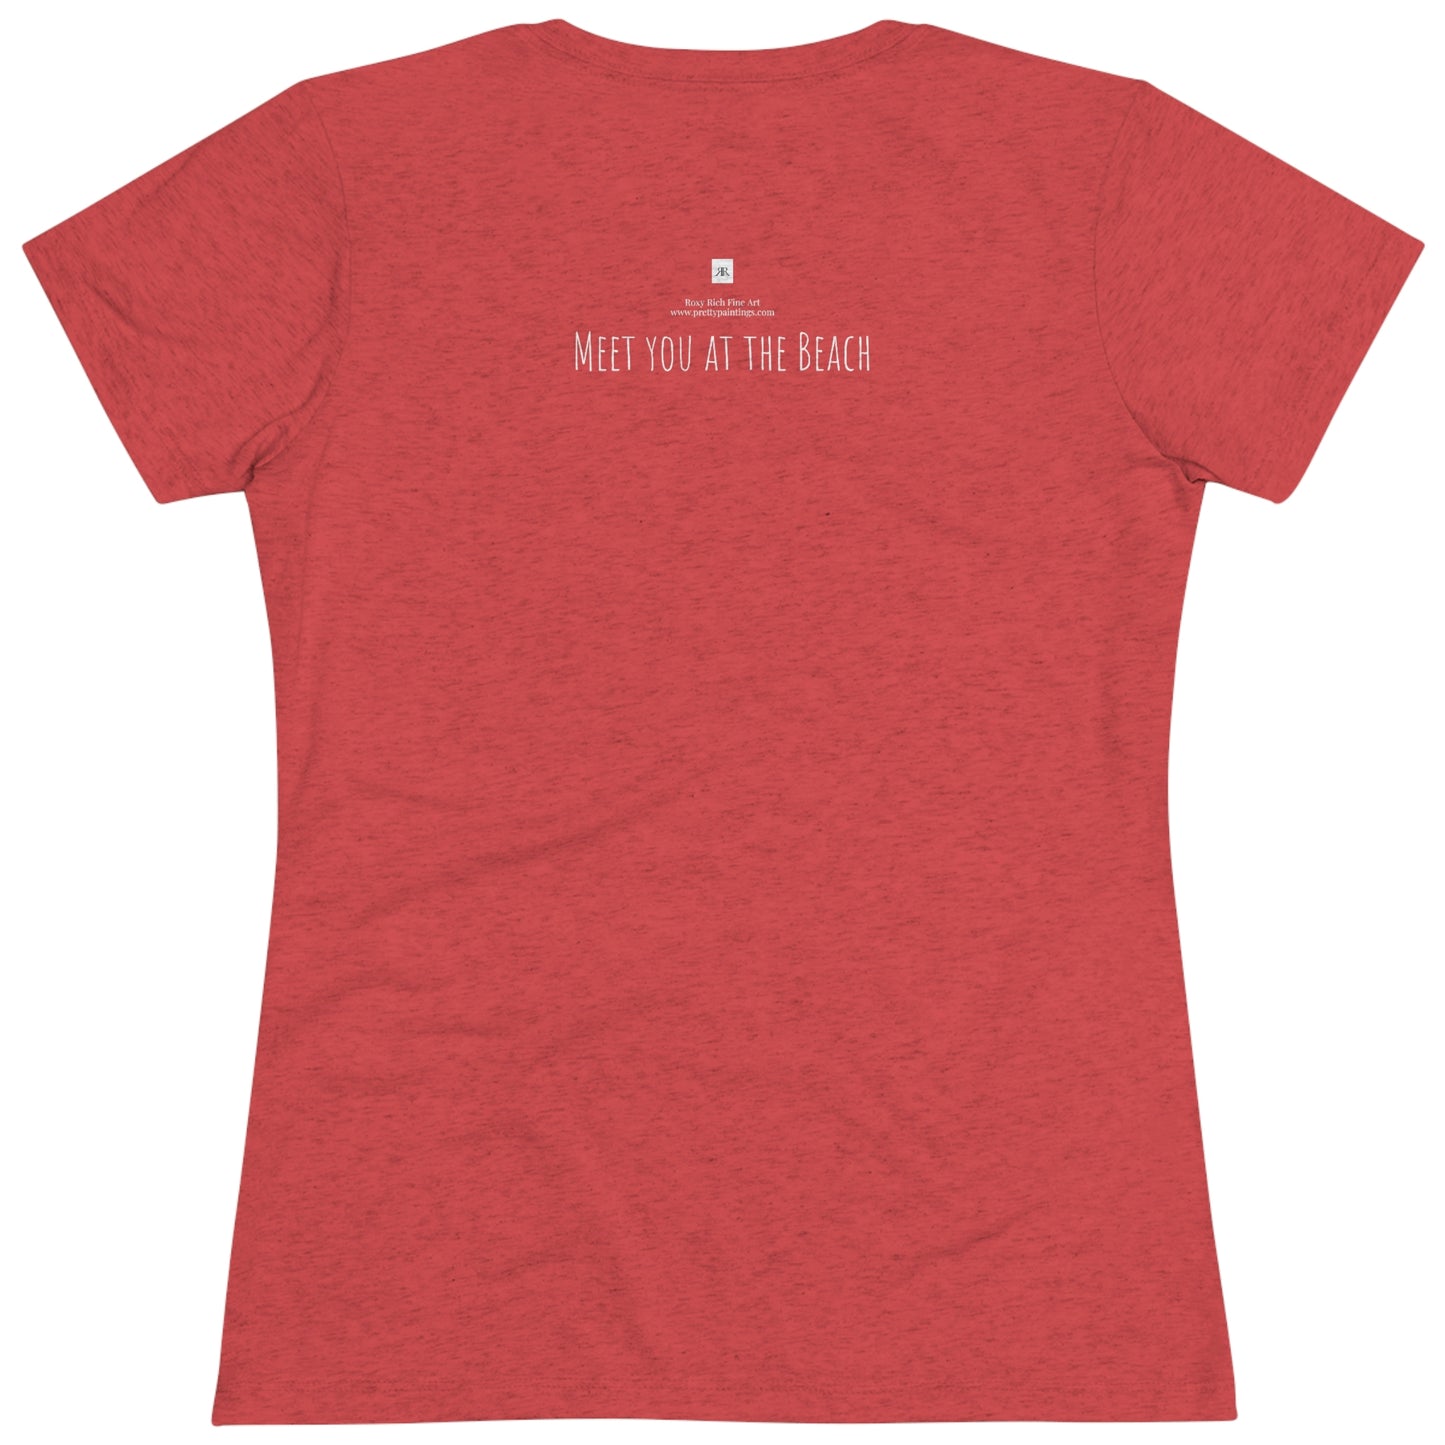 Meet you at the Beach- Women's fitted Triblend Tee  tee shirt